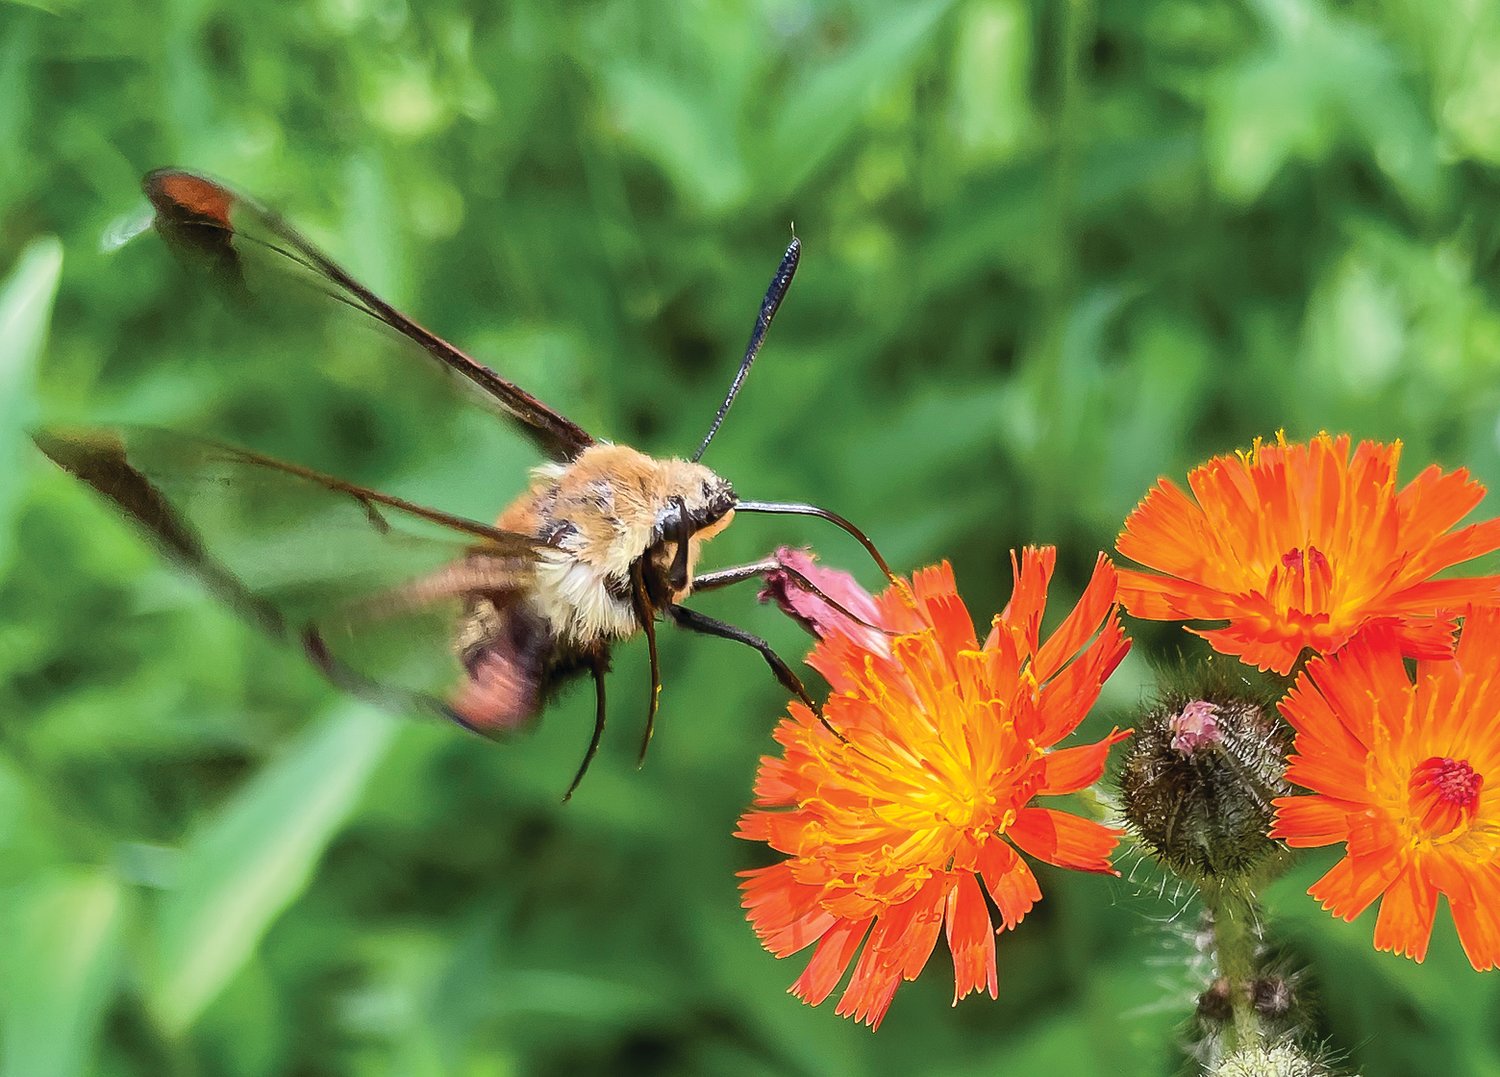 A snowberry clearwing, a species of sphinx moth, hovers over an orange hawkweed.